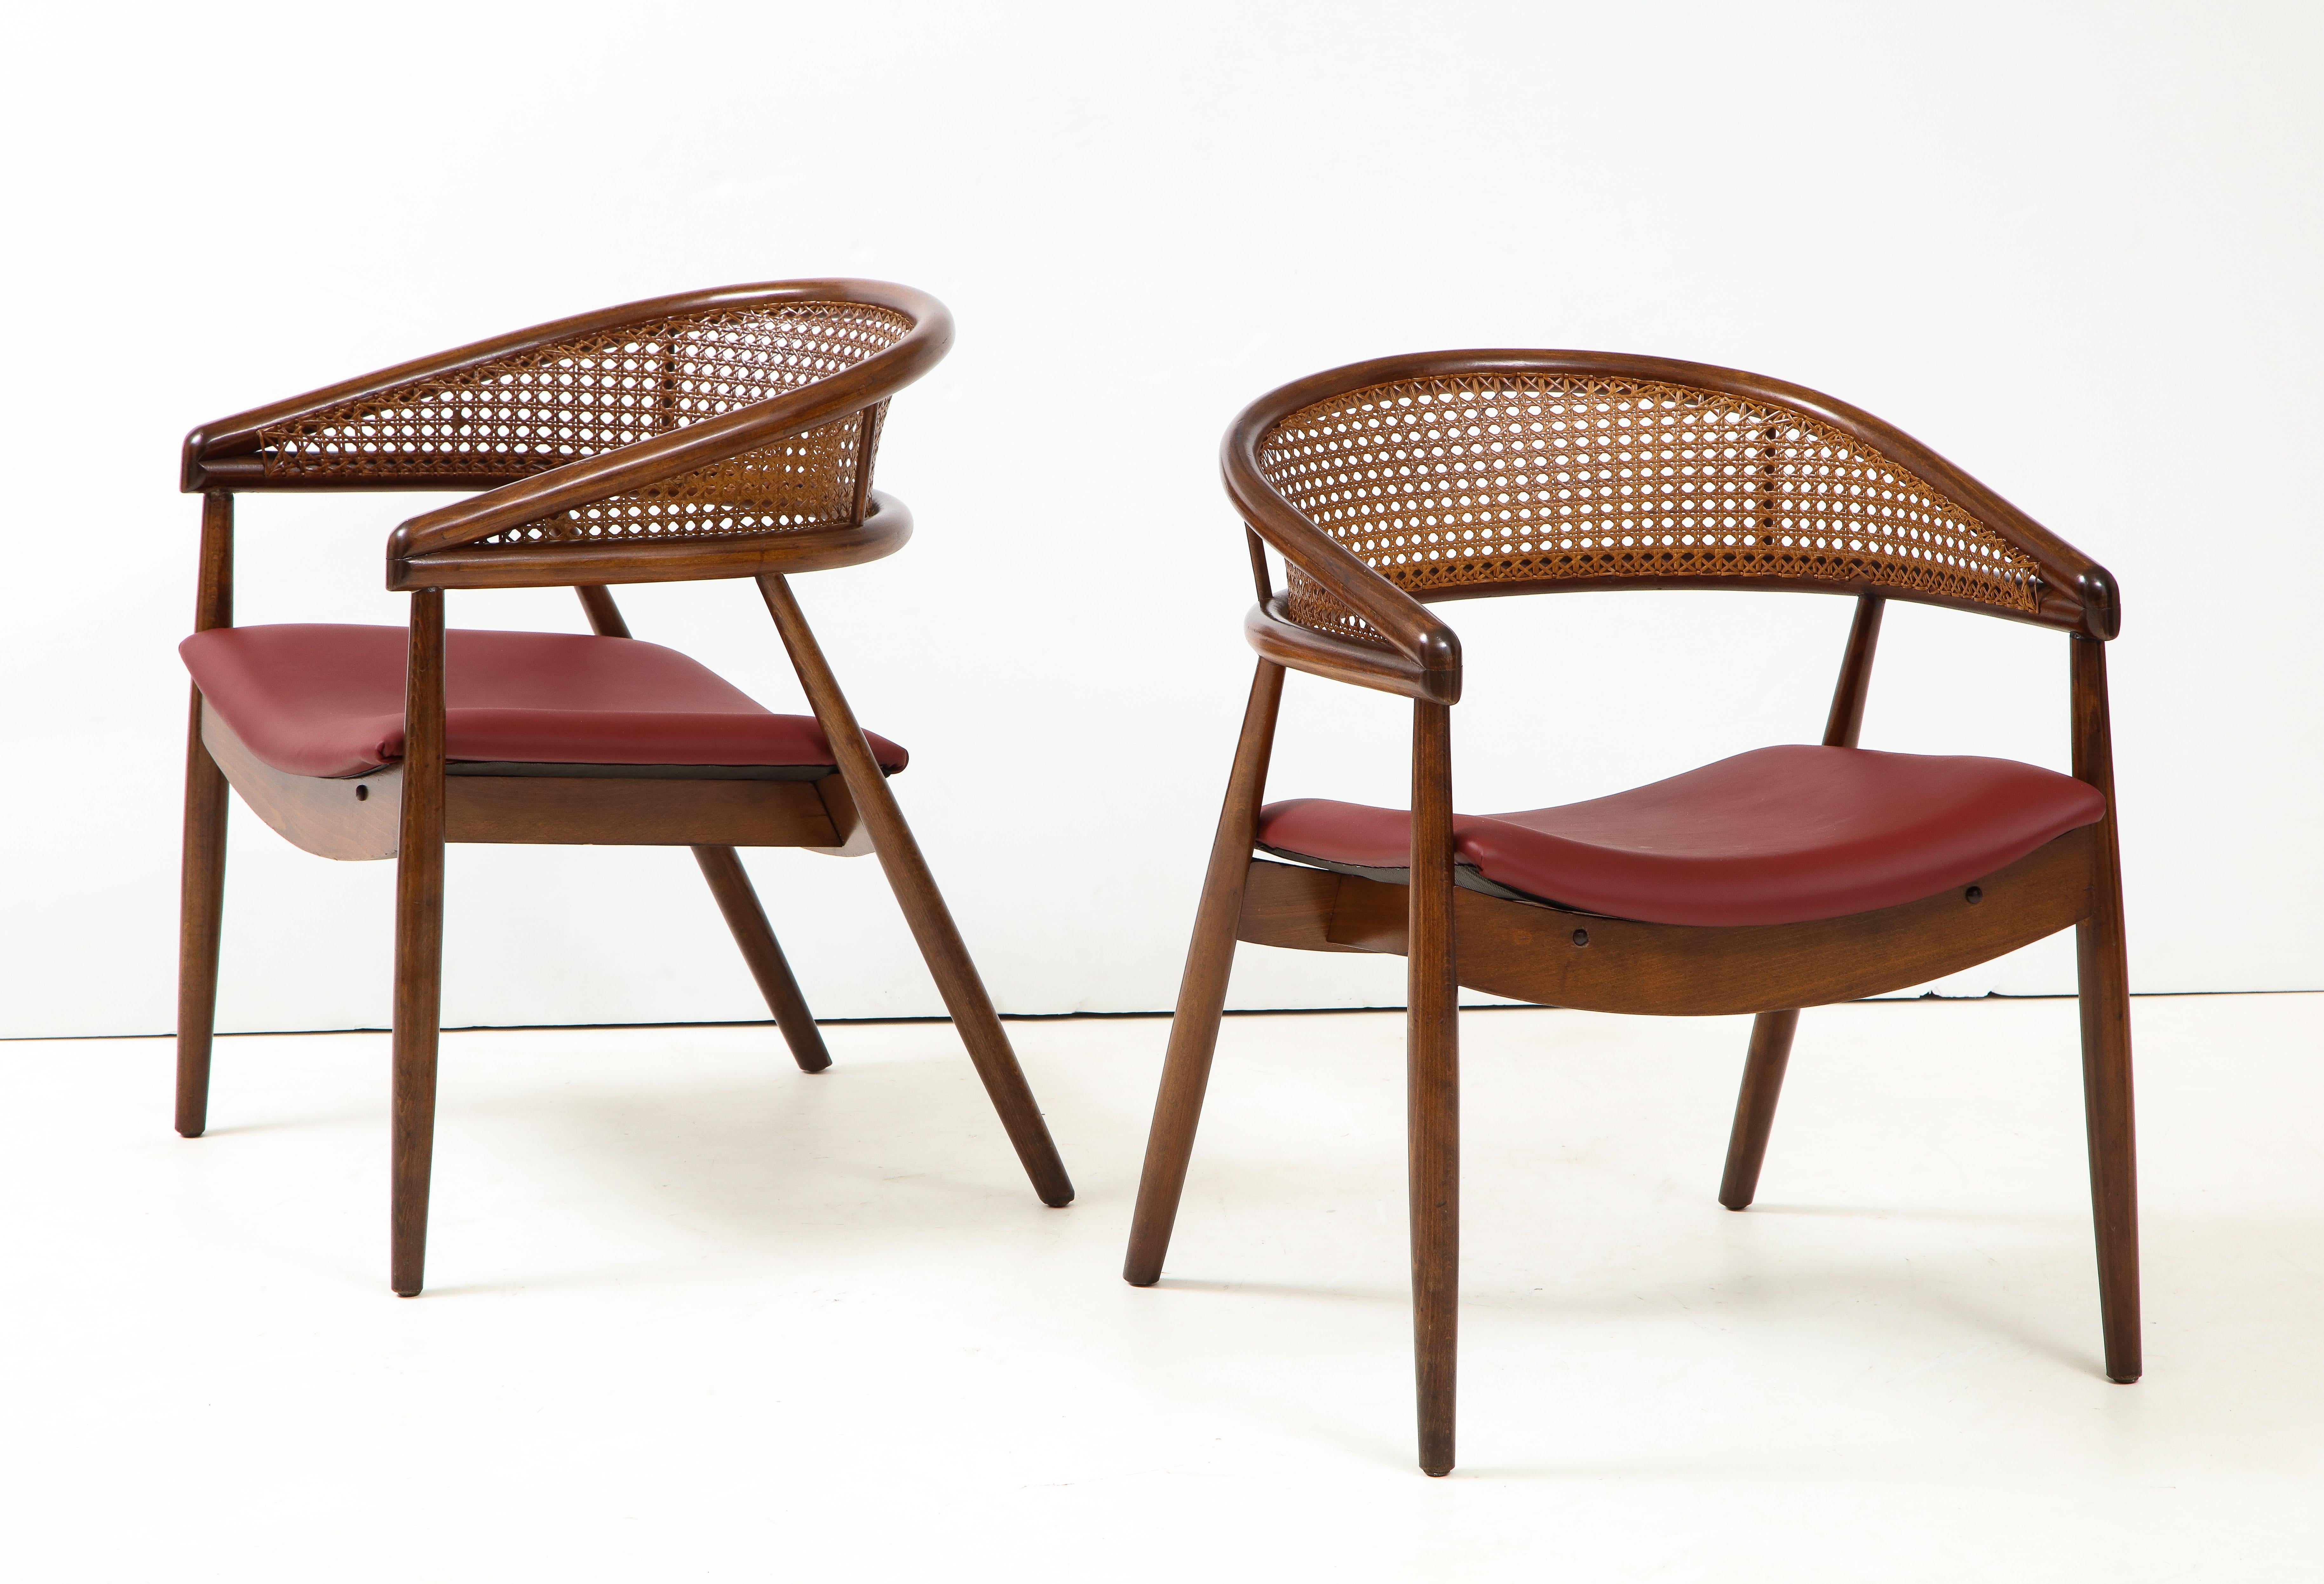 Stunning pair of 1960s James Mont style bent beech and cane armchairs with leather upholstery.